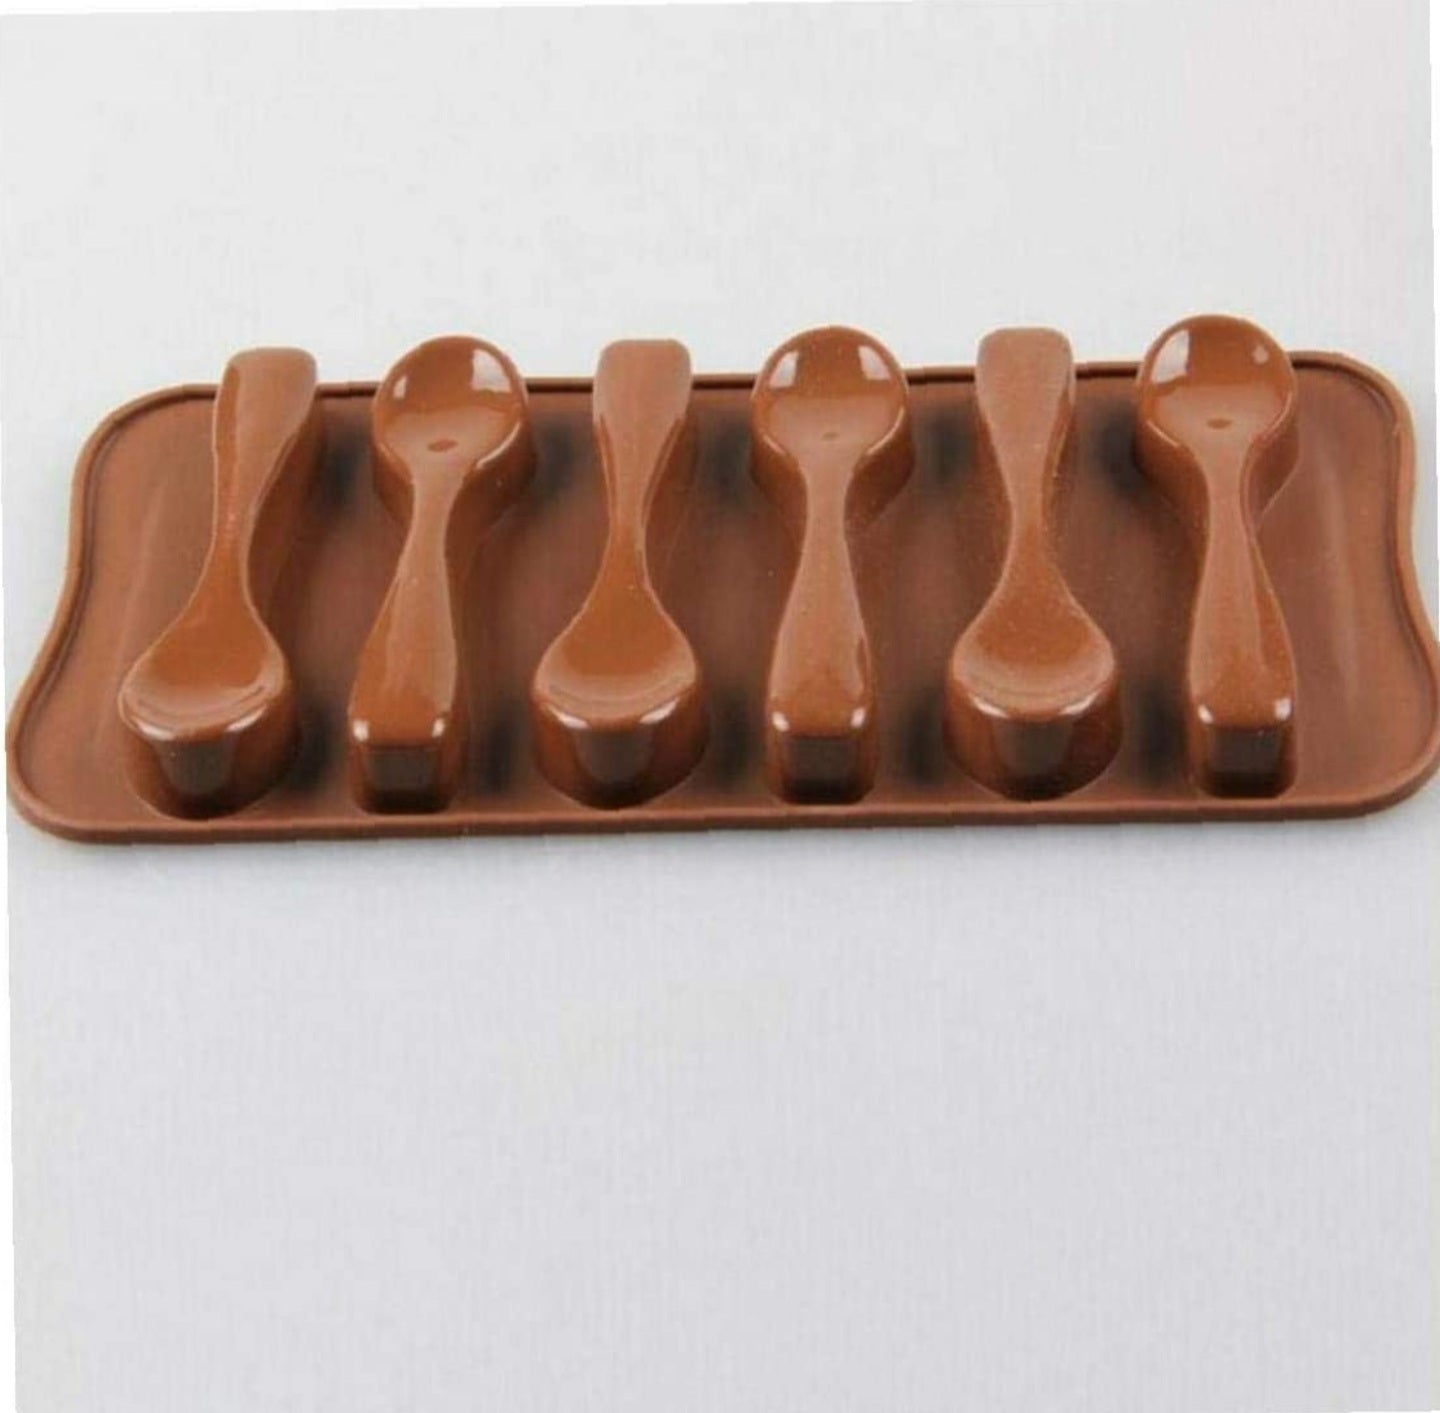 Chocolate spoons silicone mold